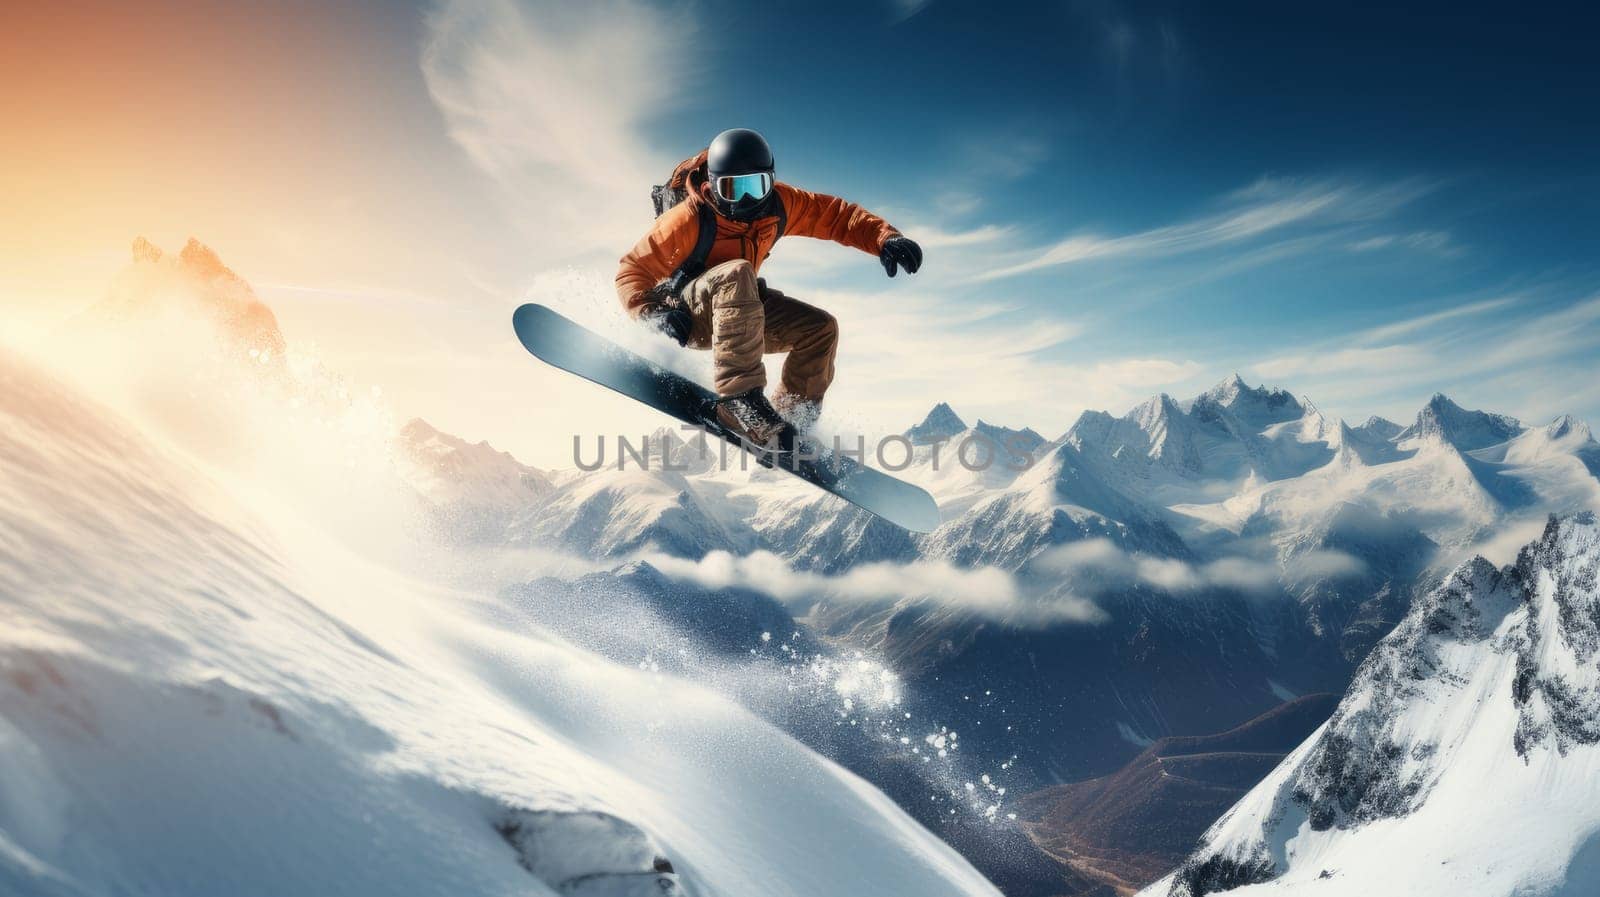 Active, extreme snowboarder jumping at speed at a ski resort, during vacation and winter holidays. Concept of traveling around the world, recreation, winter sports, vacations, tourism in the mountains and unusual places.